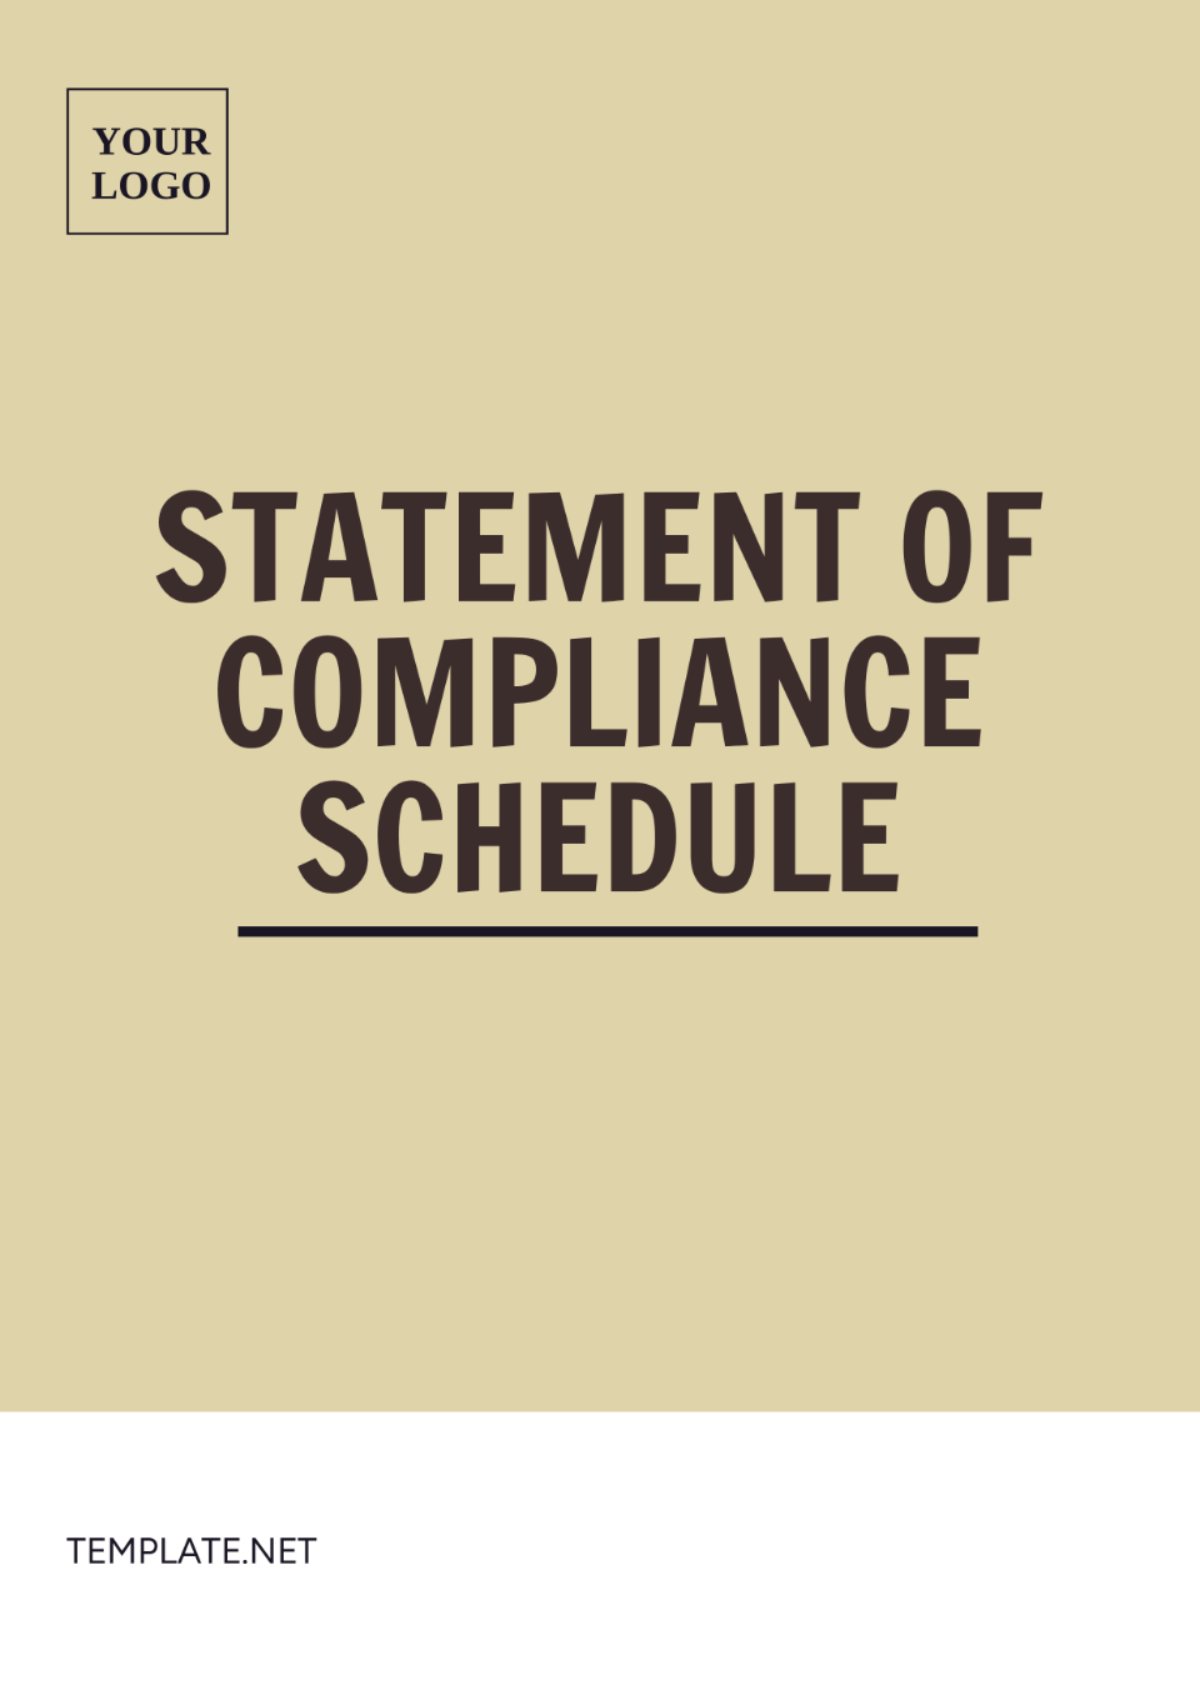 Free Statement of Compliance Schedule Template